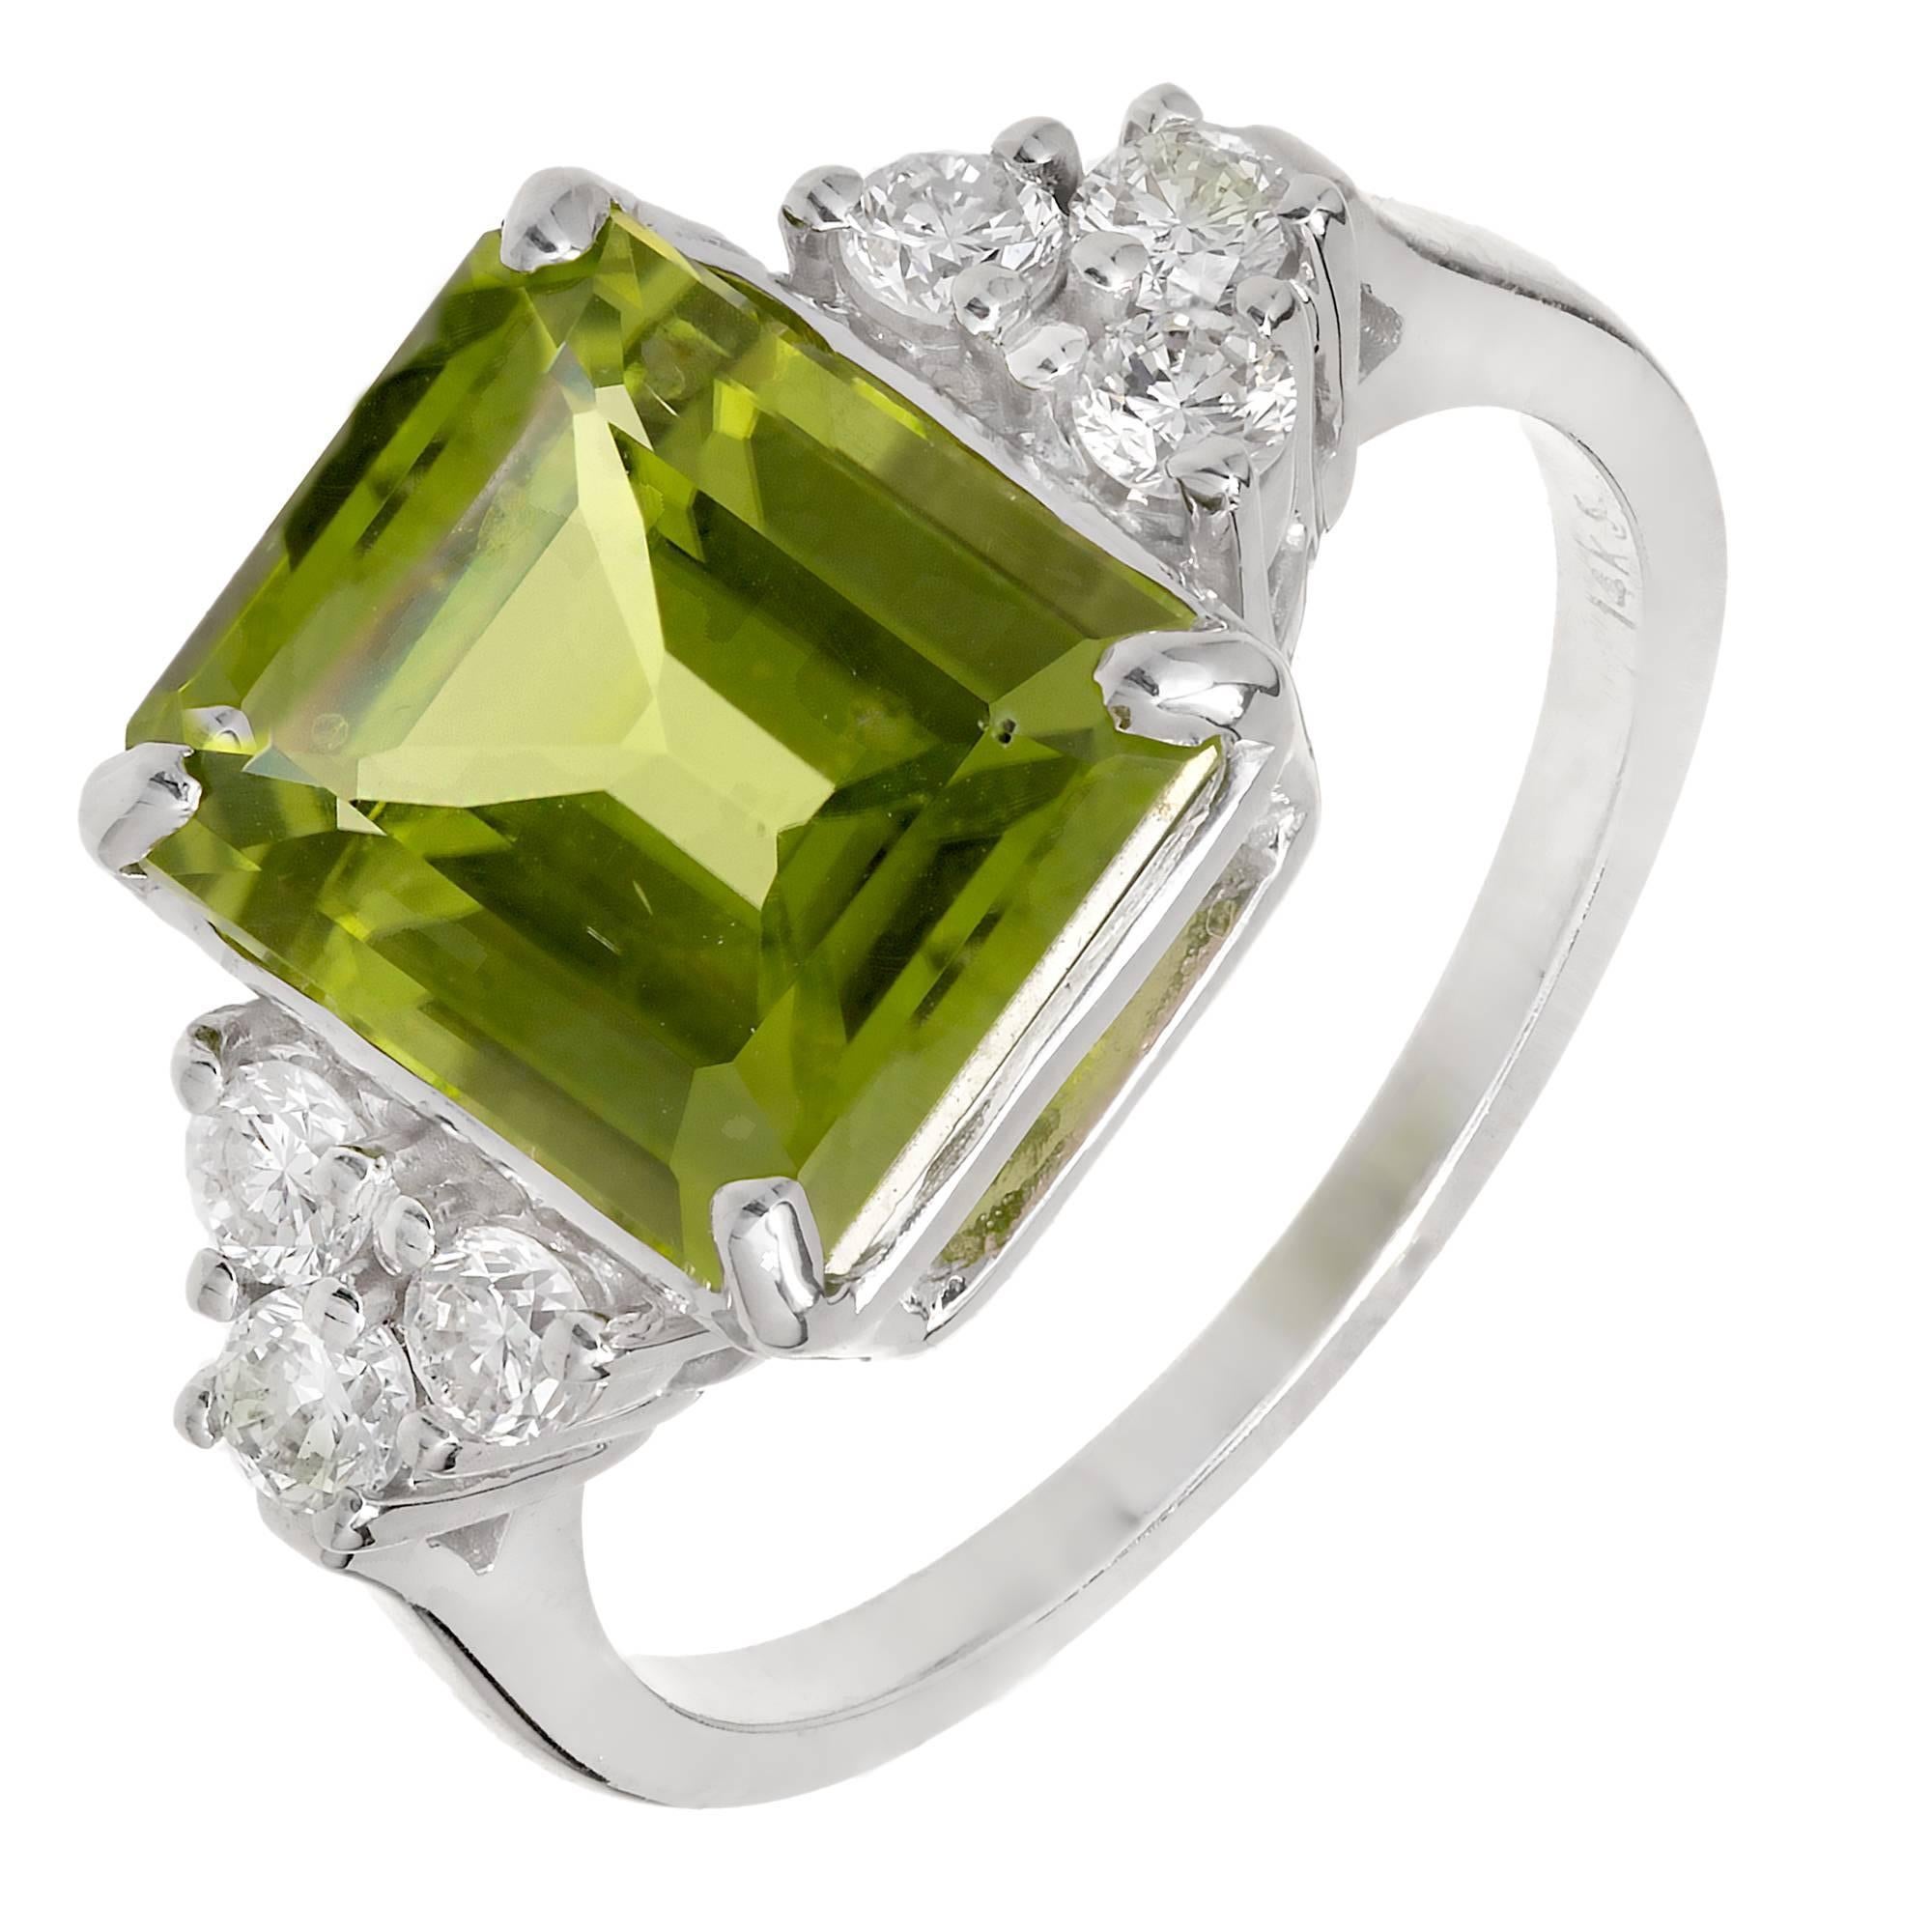 Emerald cut 3.93ct Peridot engagement ring with a very bright green Peridot and bright sparkly Diamonds in a 14k white gold setting.

1 Emerald cut medium bright green Peridot, approx. total weight 3.93cts, VS
6 round full cut Diamonds, approx.